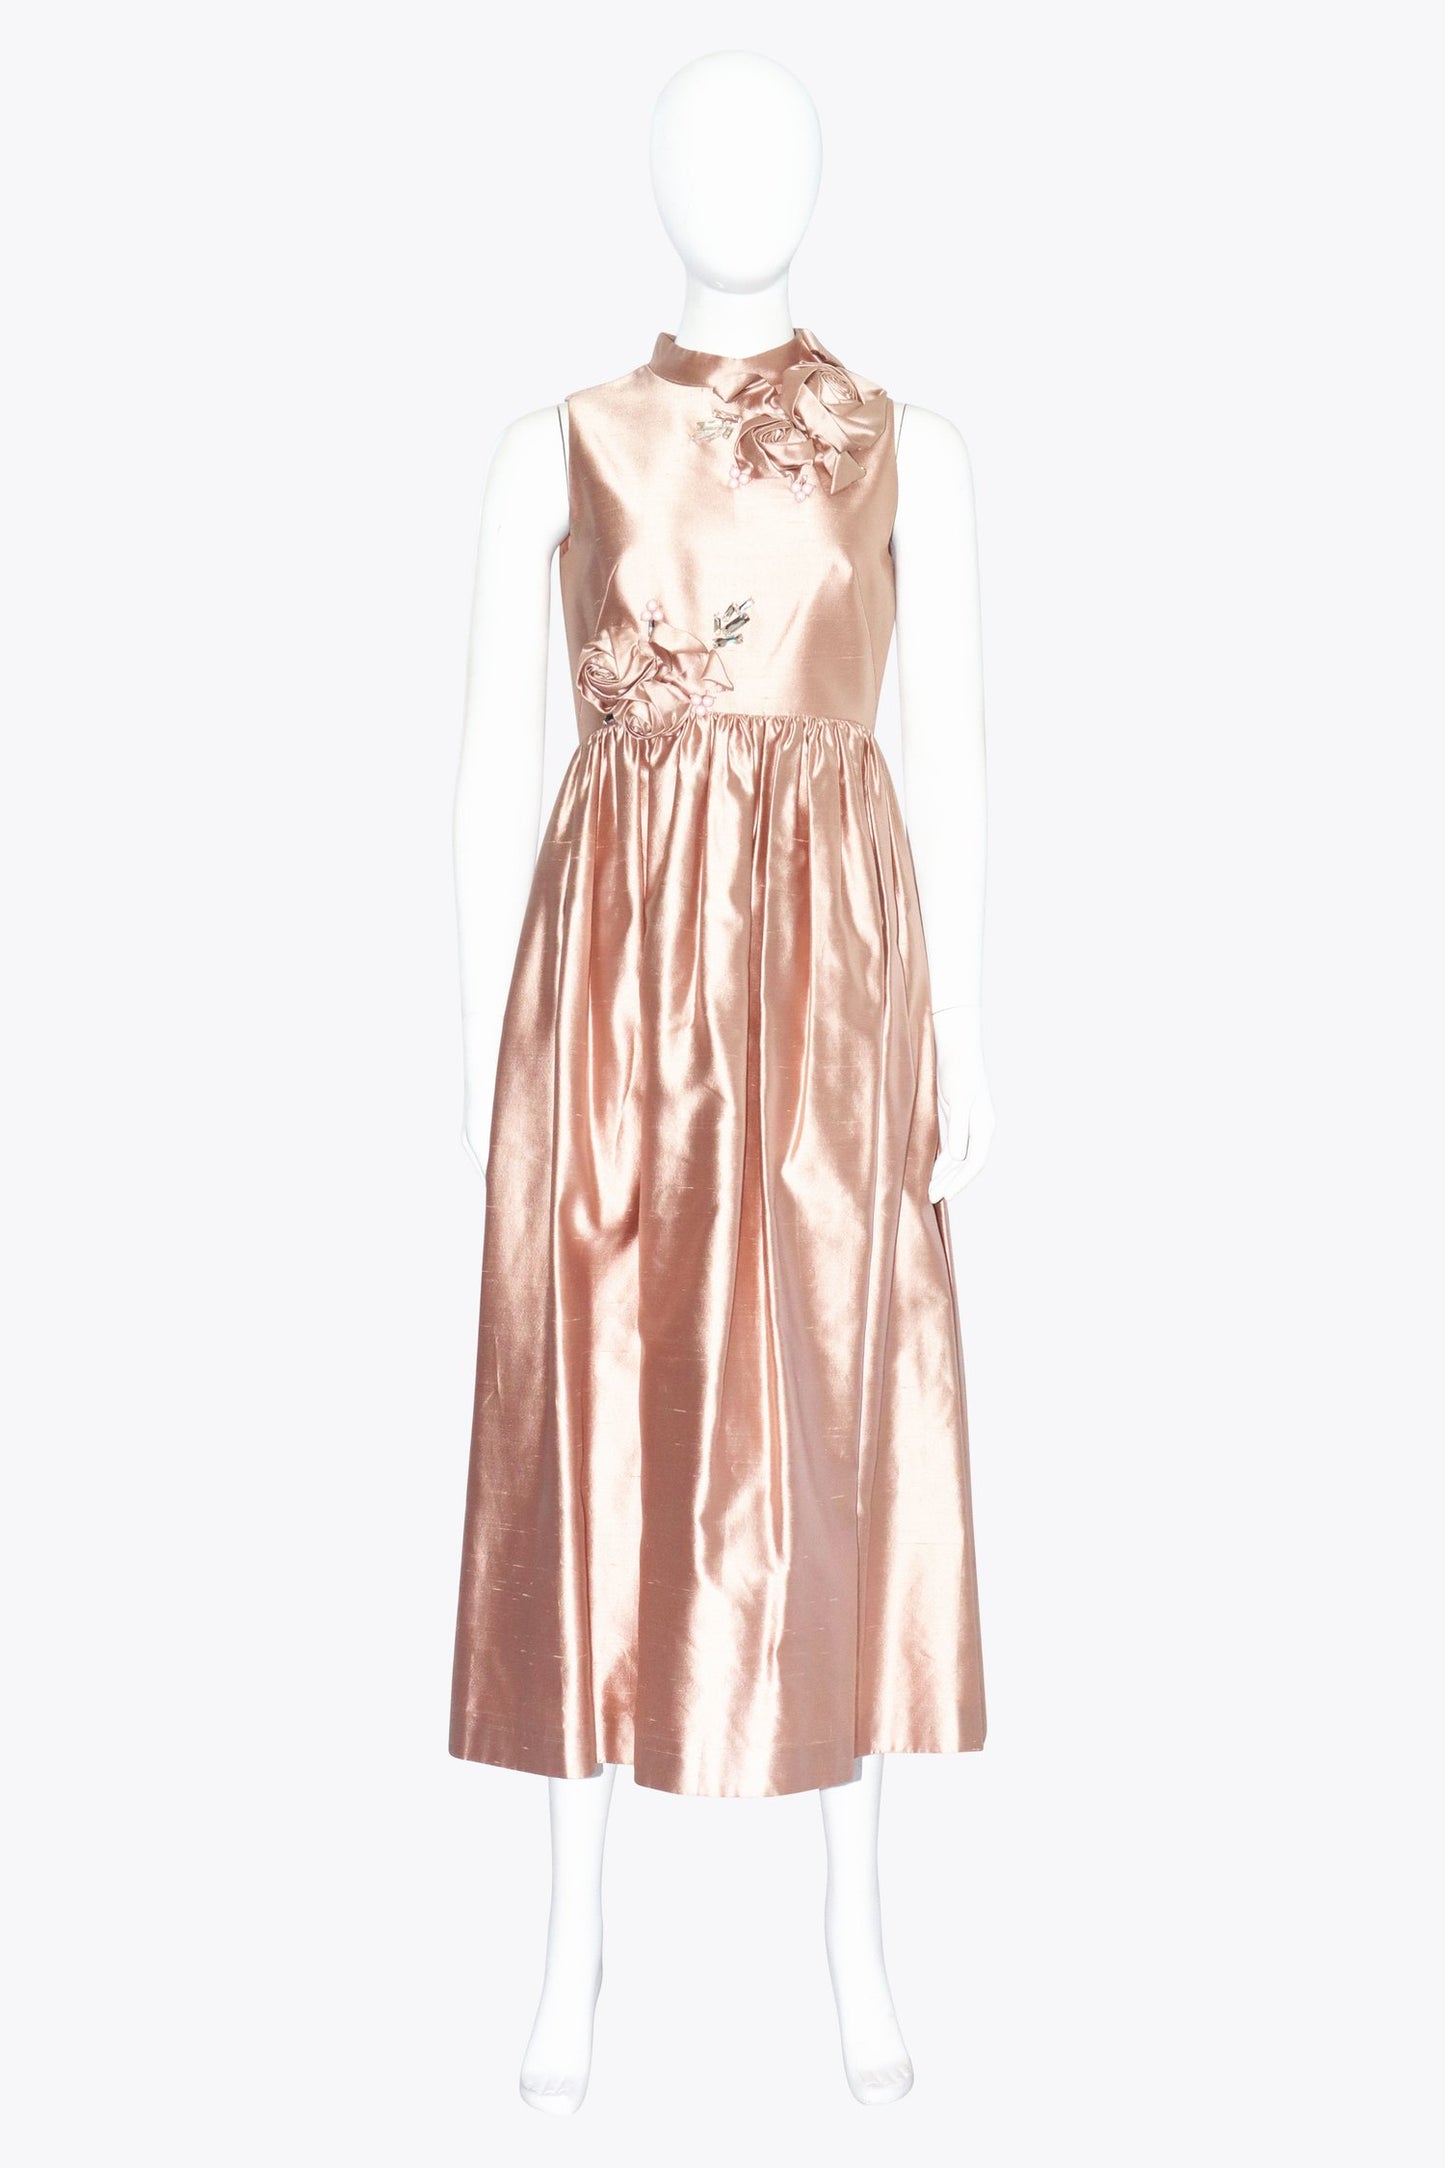 NL Pink Metallic Mock-Neck Gown With Rose Details